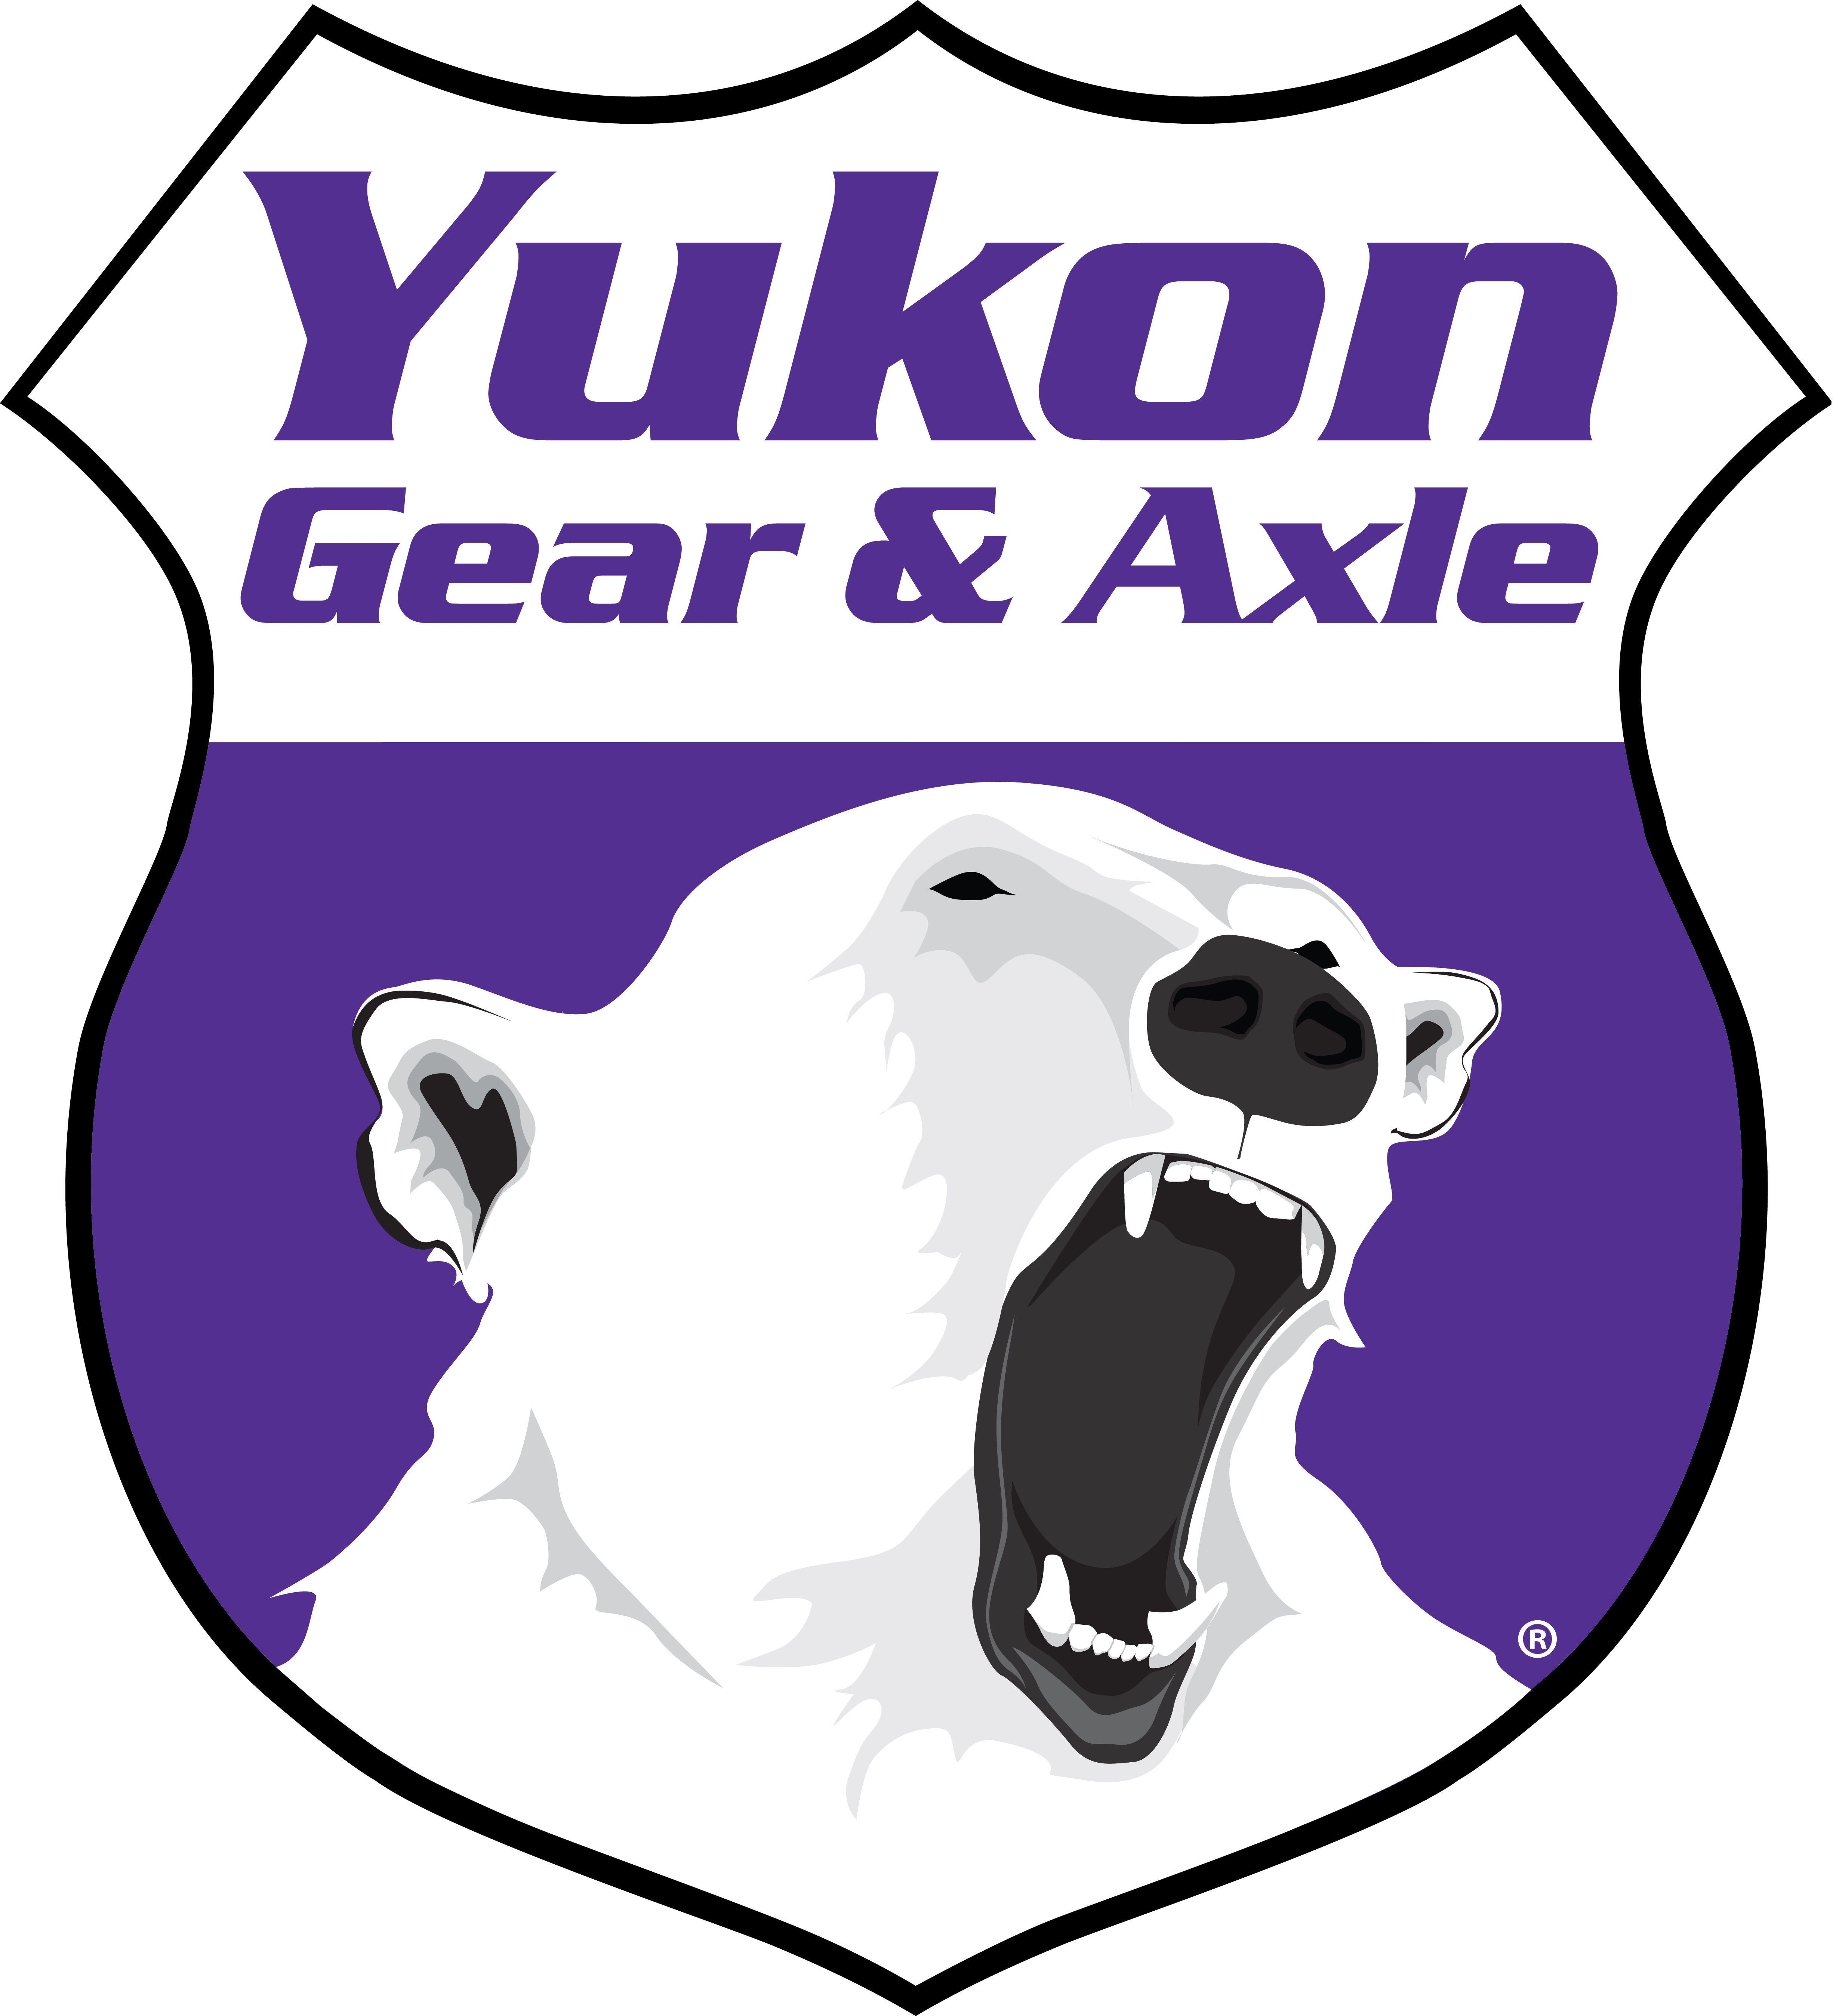 Yukon Minor install kit for Ford 9" differential 